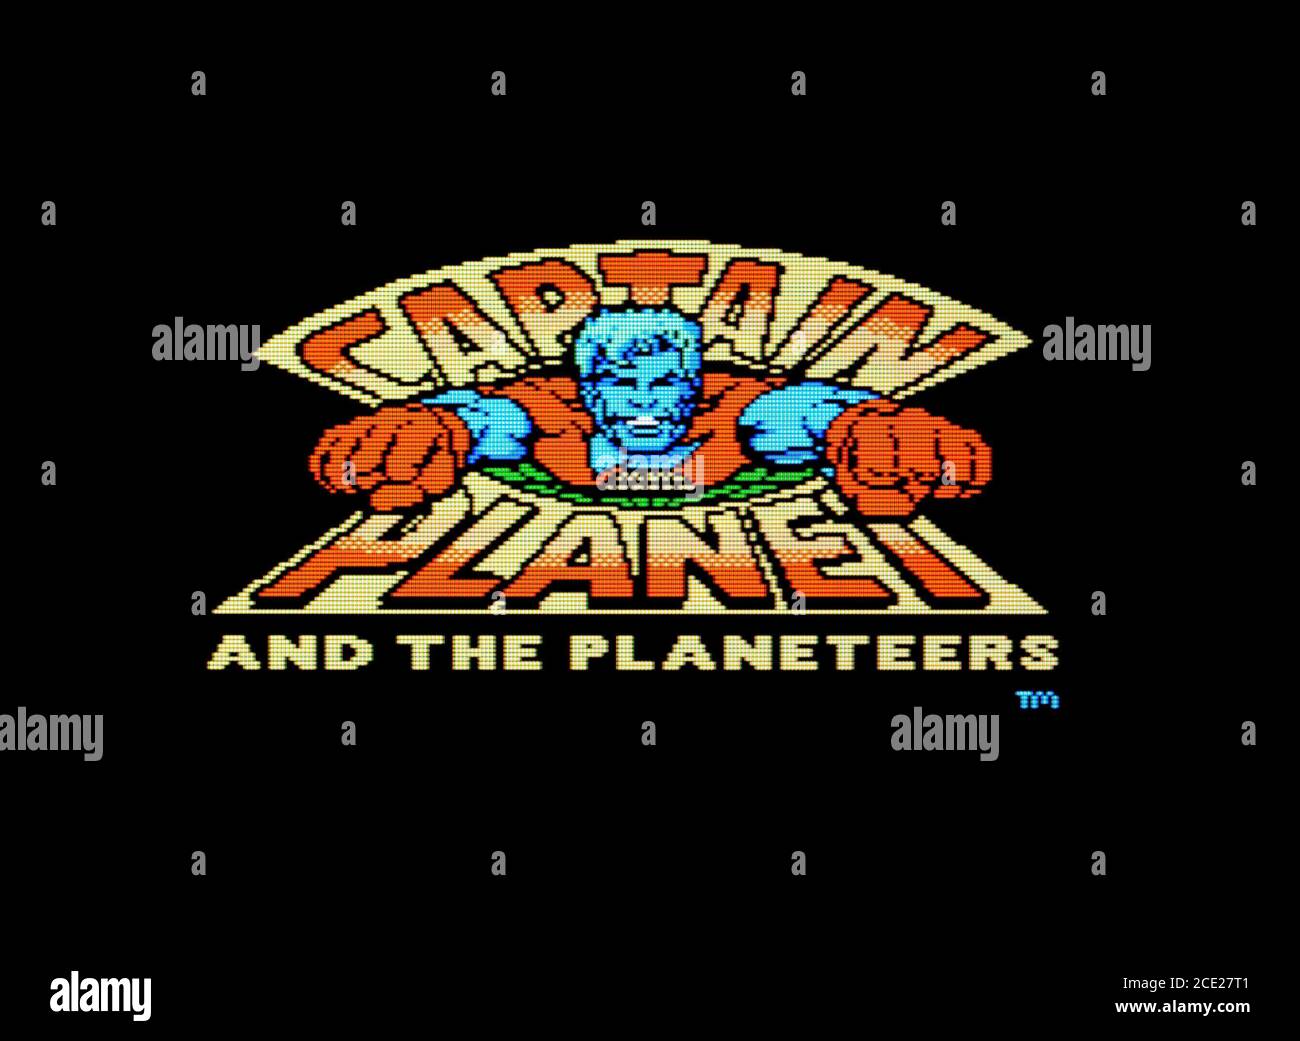 Captain Planet and the Planeteers - Nintendo Entertainment System - NES Videogame - Editorial use only Stock Photo